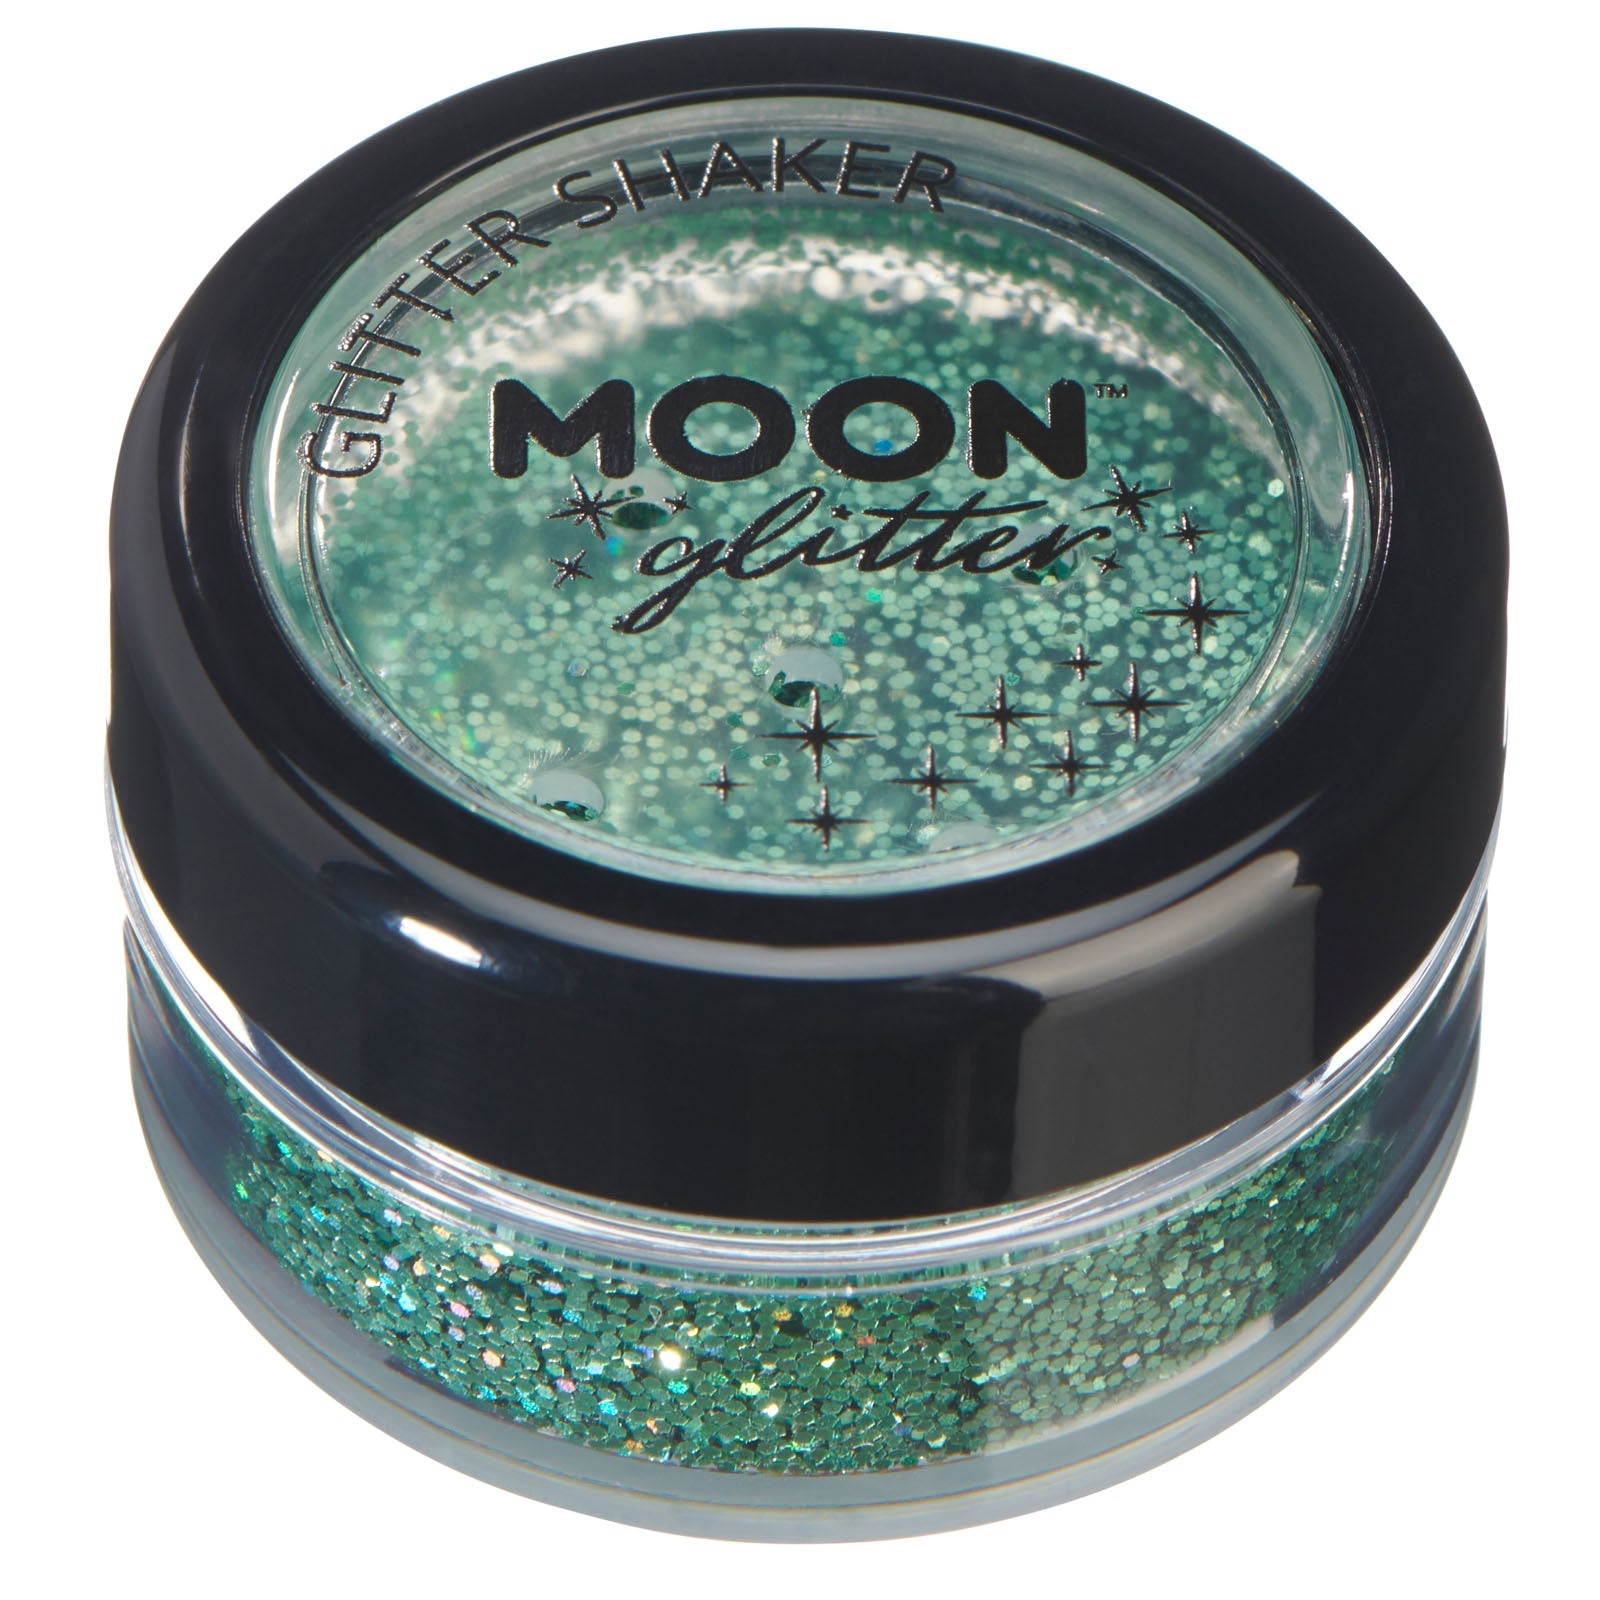 Green - Holographic Fine Face & Body Glitter Shaker, 5g. Cosmetically certified, FDA & Health Canada compliant, cruelty free and vegan.